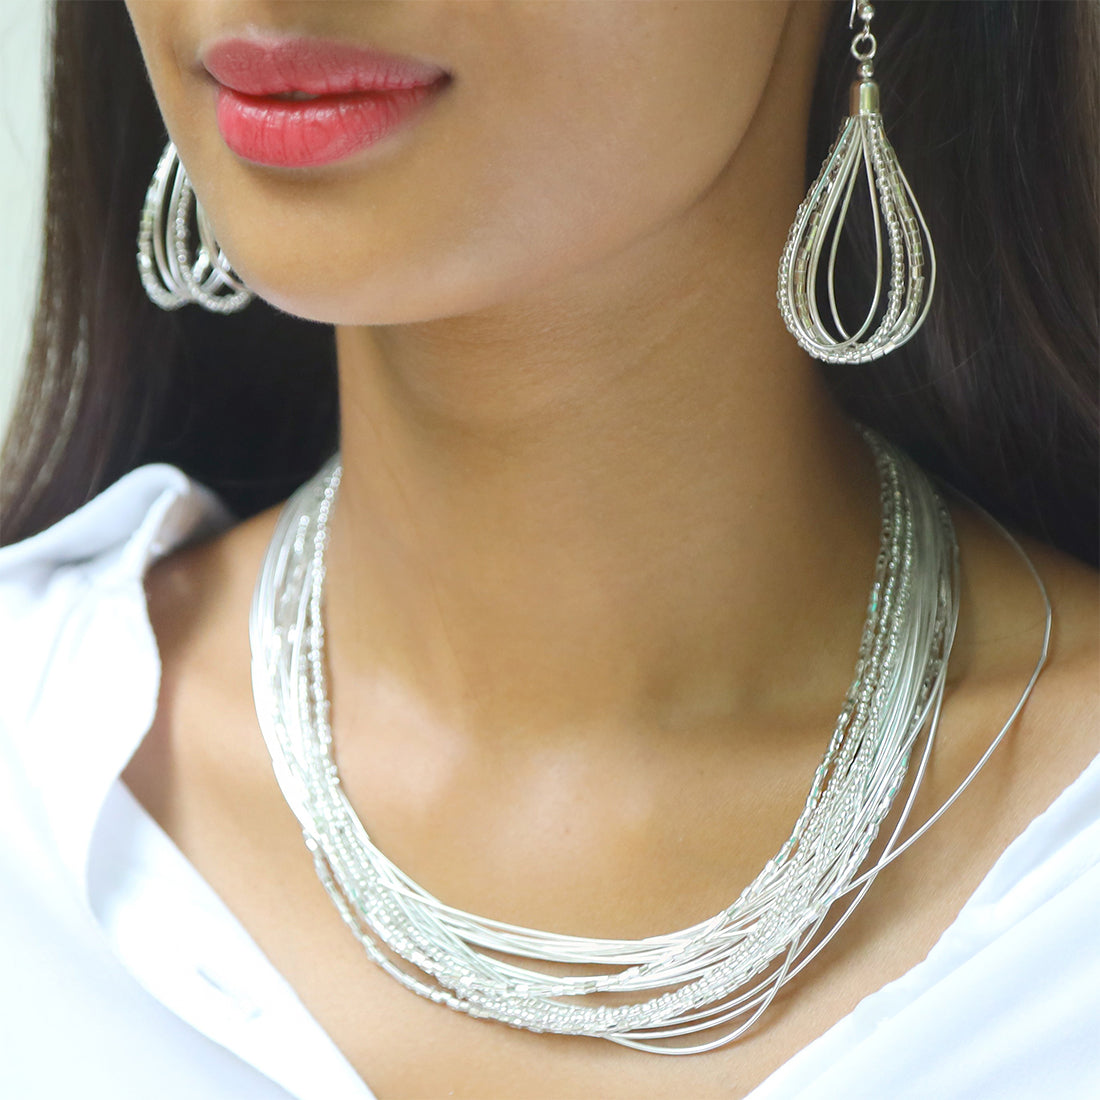 SET OF TWO SILVER-TONED BEADED MULTILAYERED NECKLACE & EARRINGS